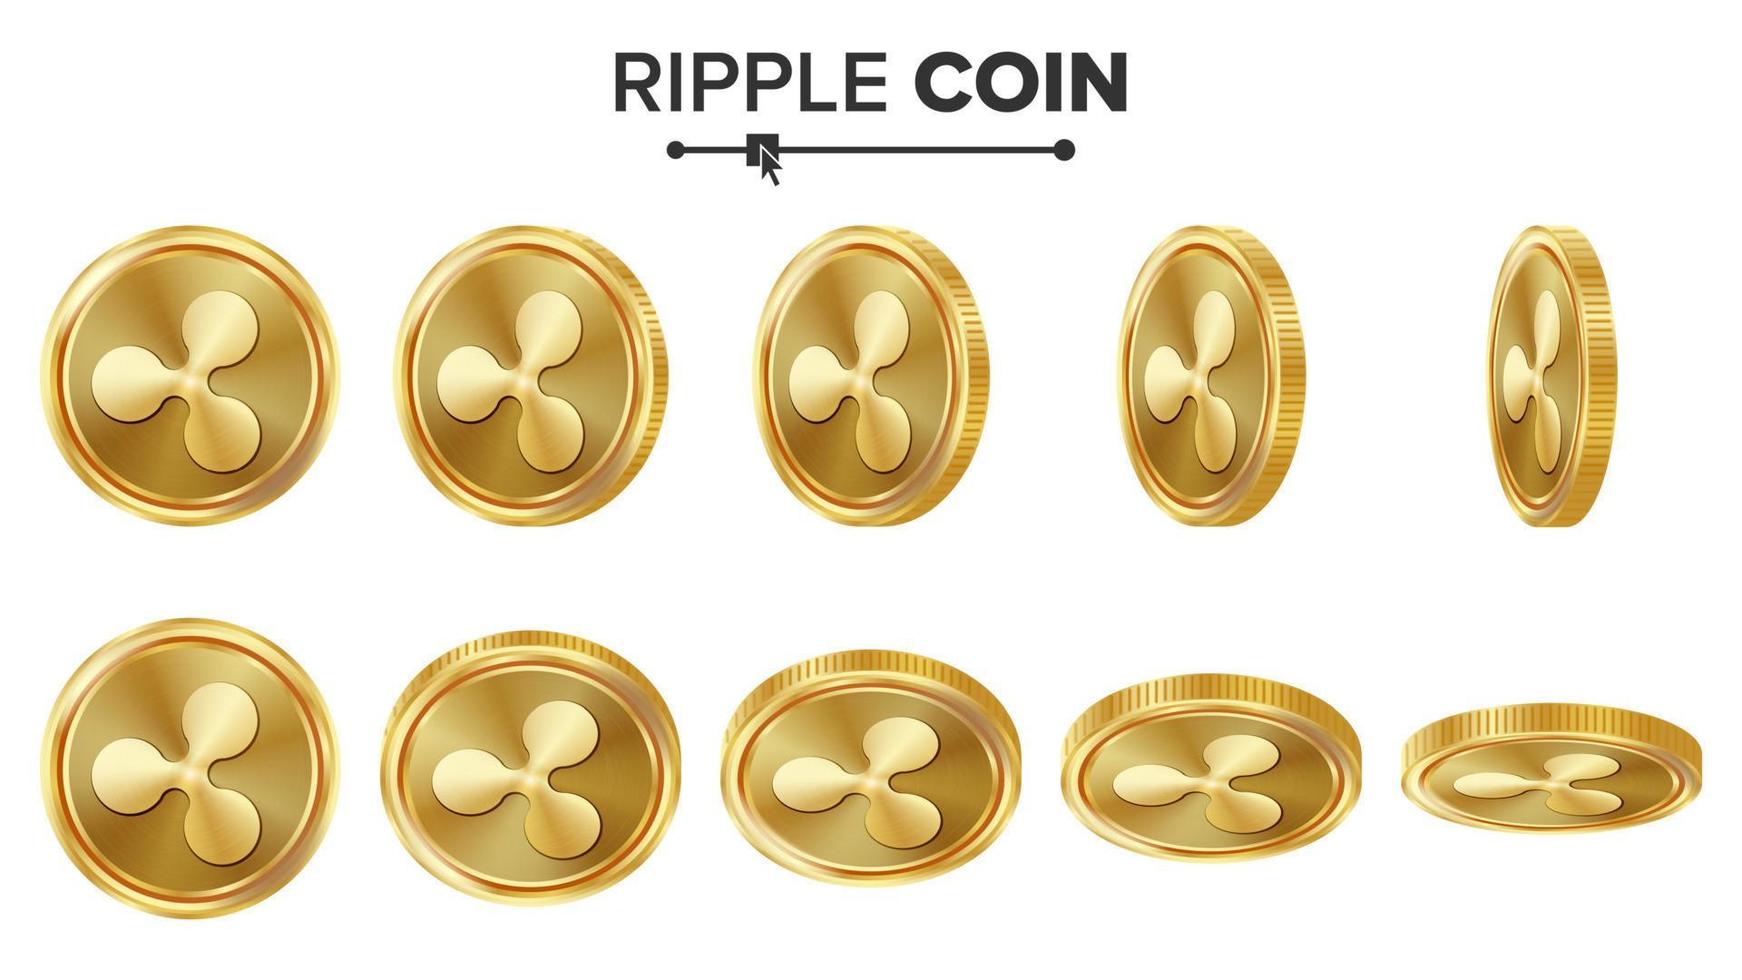 Ripple Coin 3D Gold Coins Vector Set. Realistic. Flip Different Angles. Digital Currency Money. Investment Concept. Cryptography Finance Coin Icons Sign. Fintech Blockchain. Currency Isolated On White